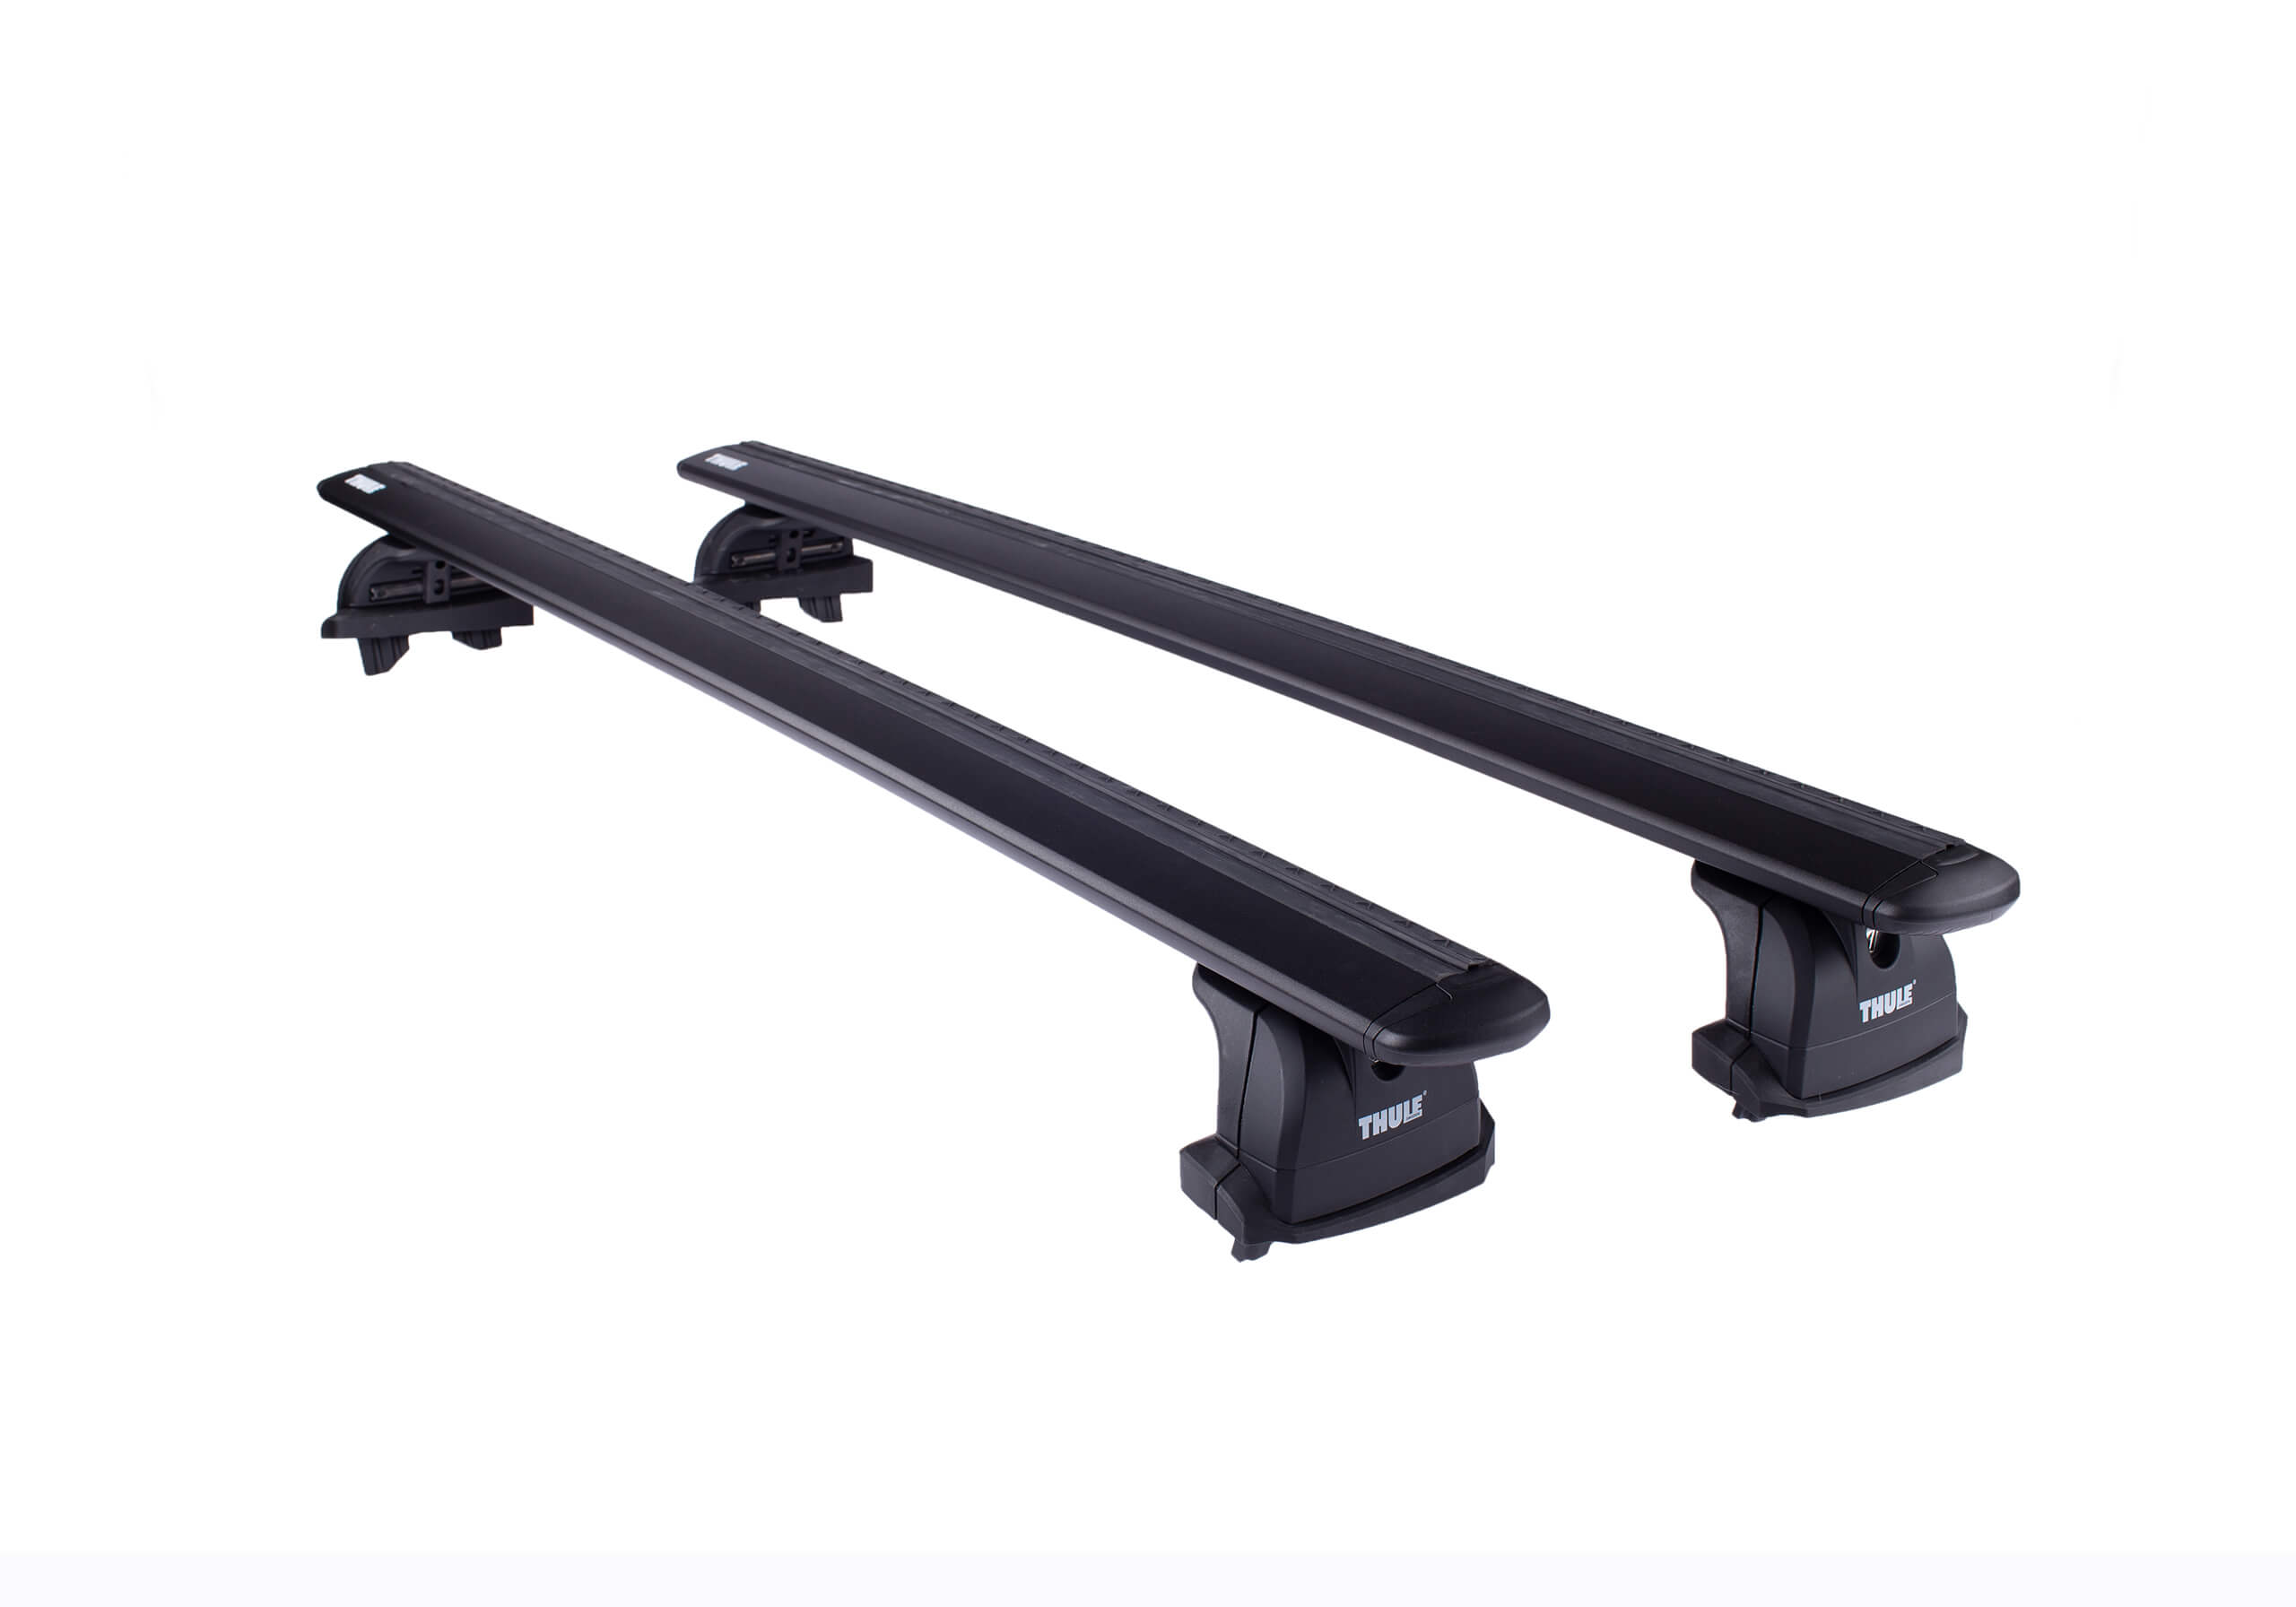 Fiat Doblo L1 (SWB) H1 (low roof) (2000 to 2010):Thule black WingBars package - 753, 7112B, 3021